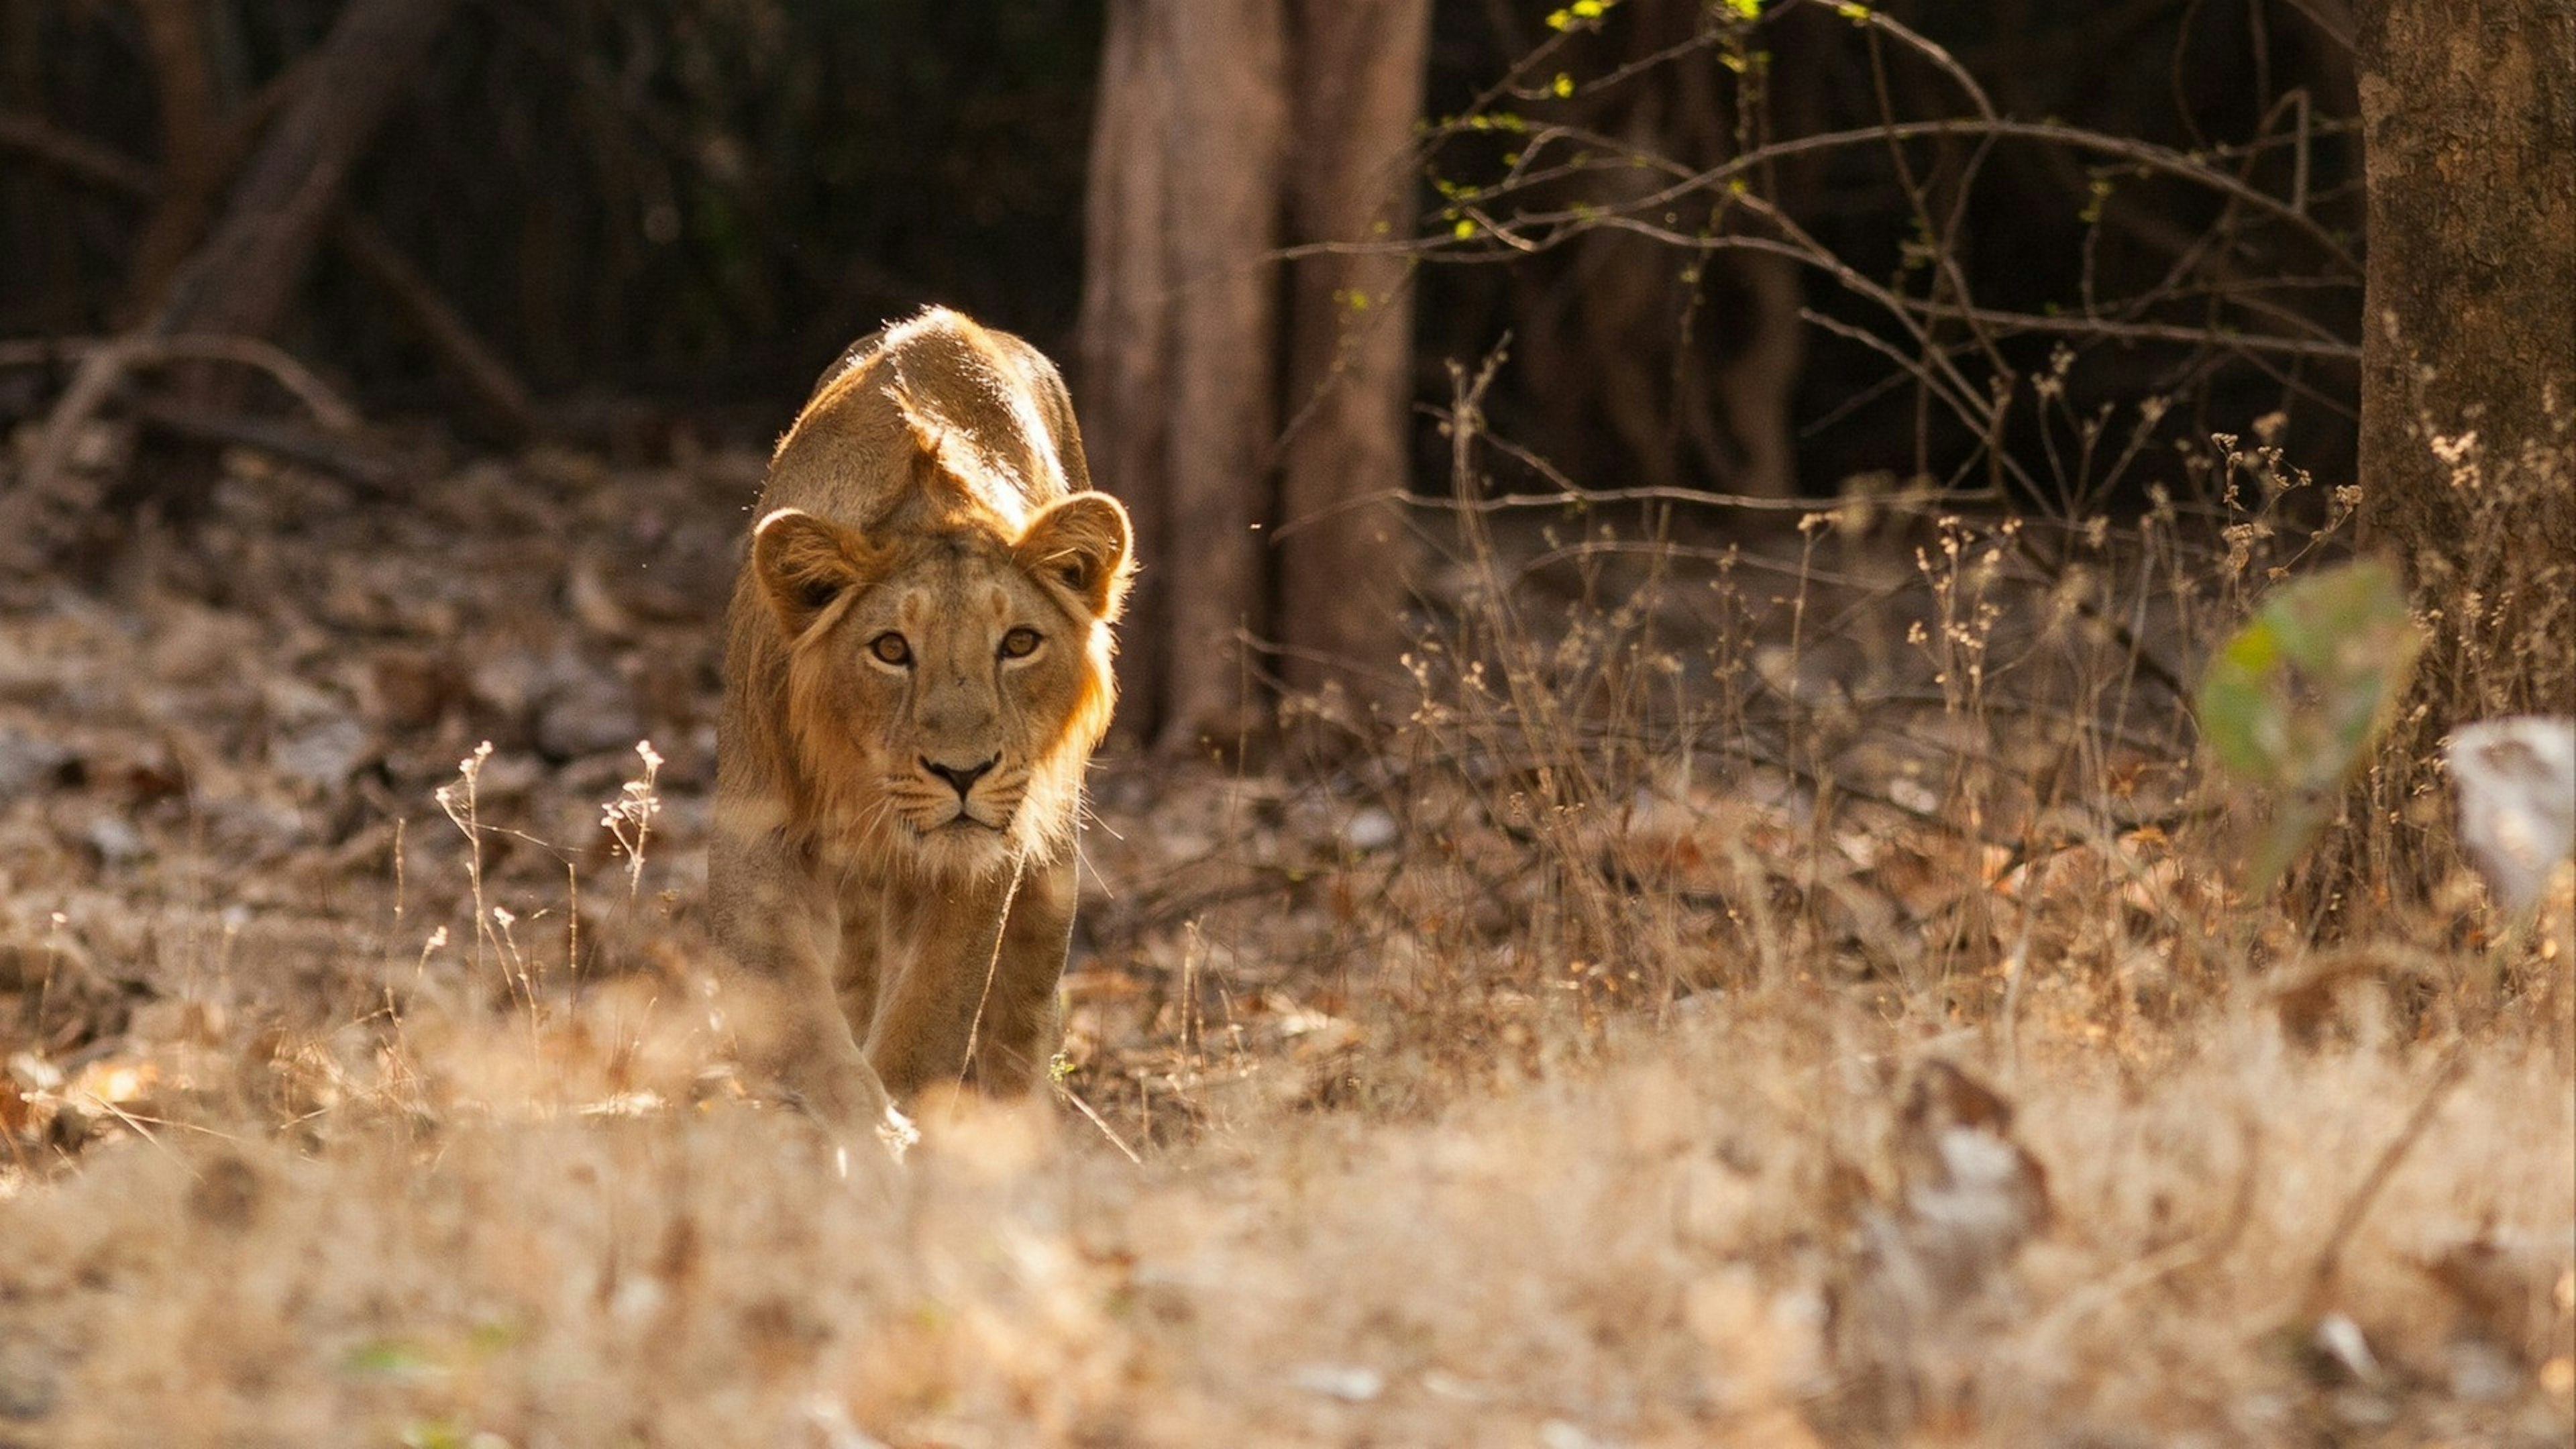 Asiatic lion (Panthera leo leo) in Gir Forest National Park in Gujarat